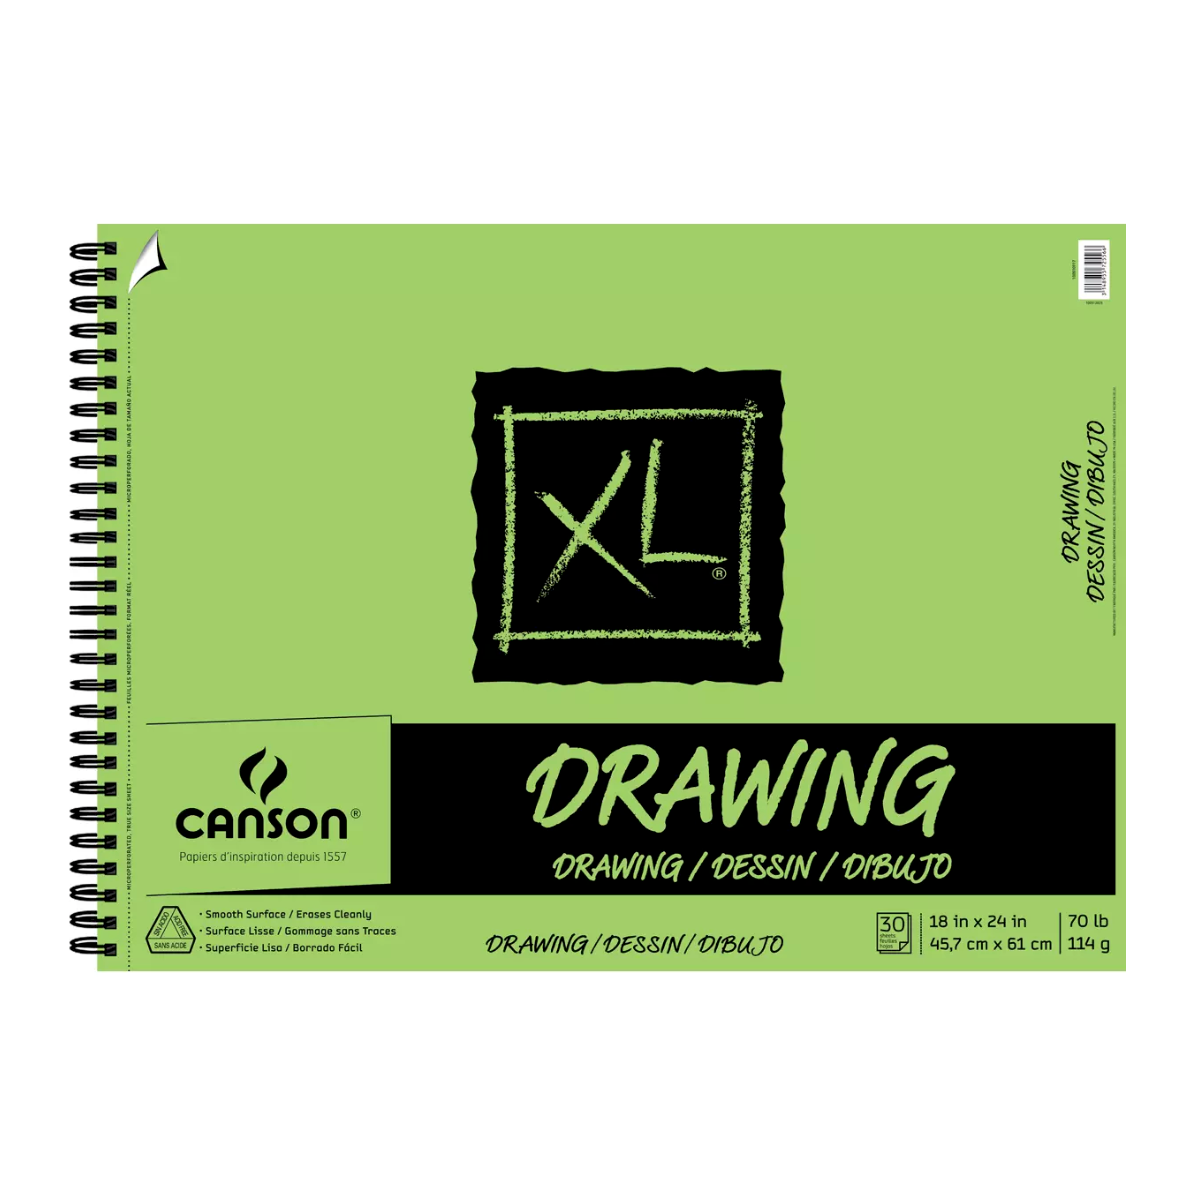 Canson XL Mix Media Sketch Pad, 9 X 12 Drawing Paper Spiral